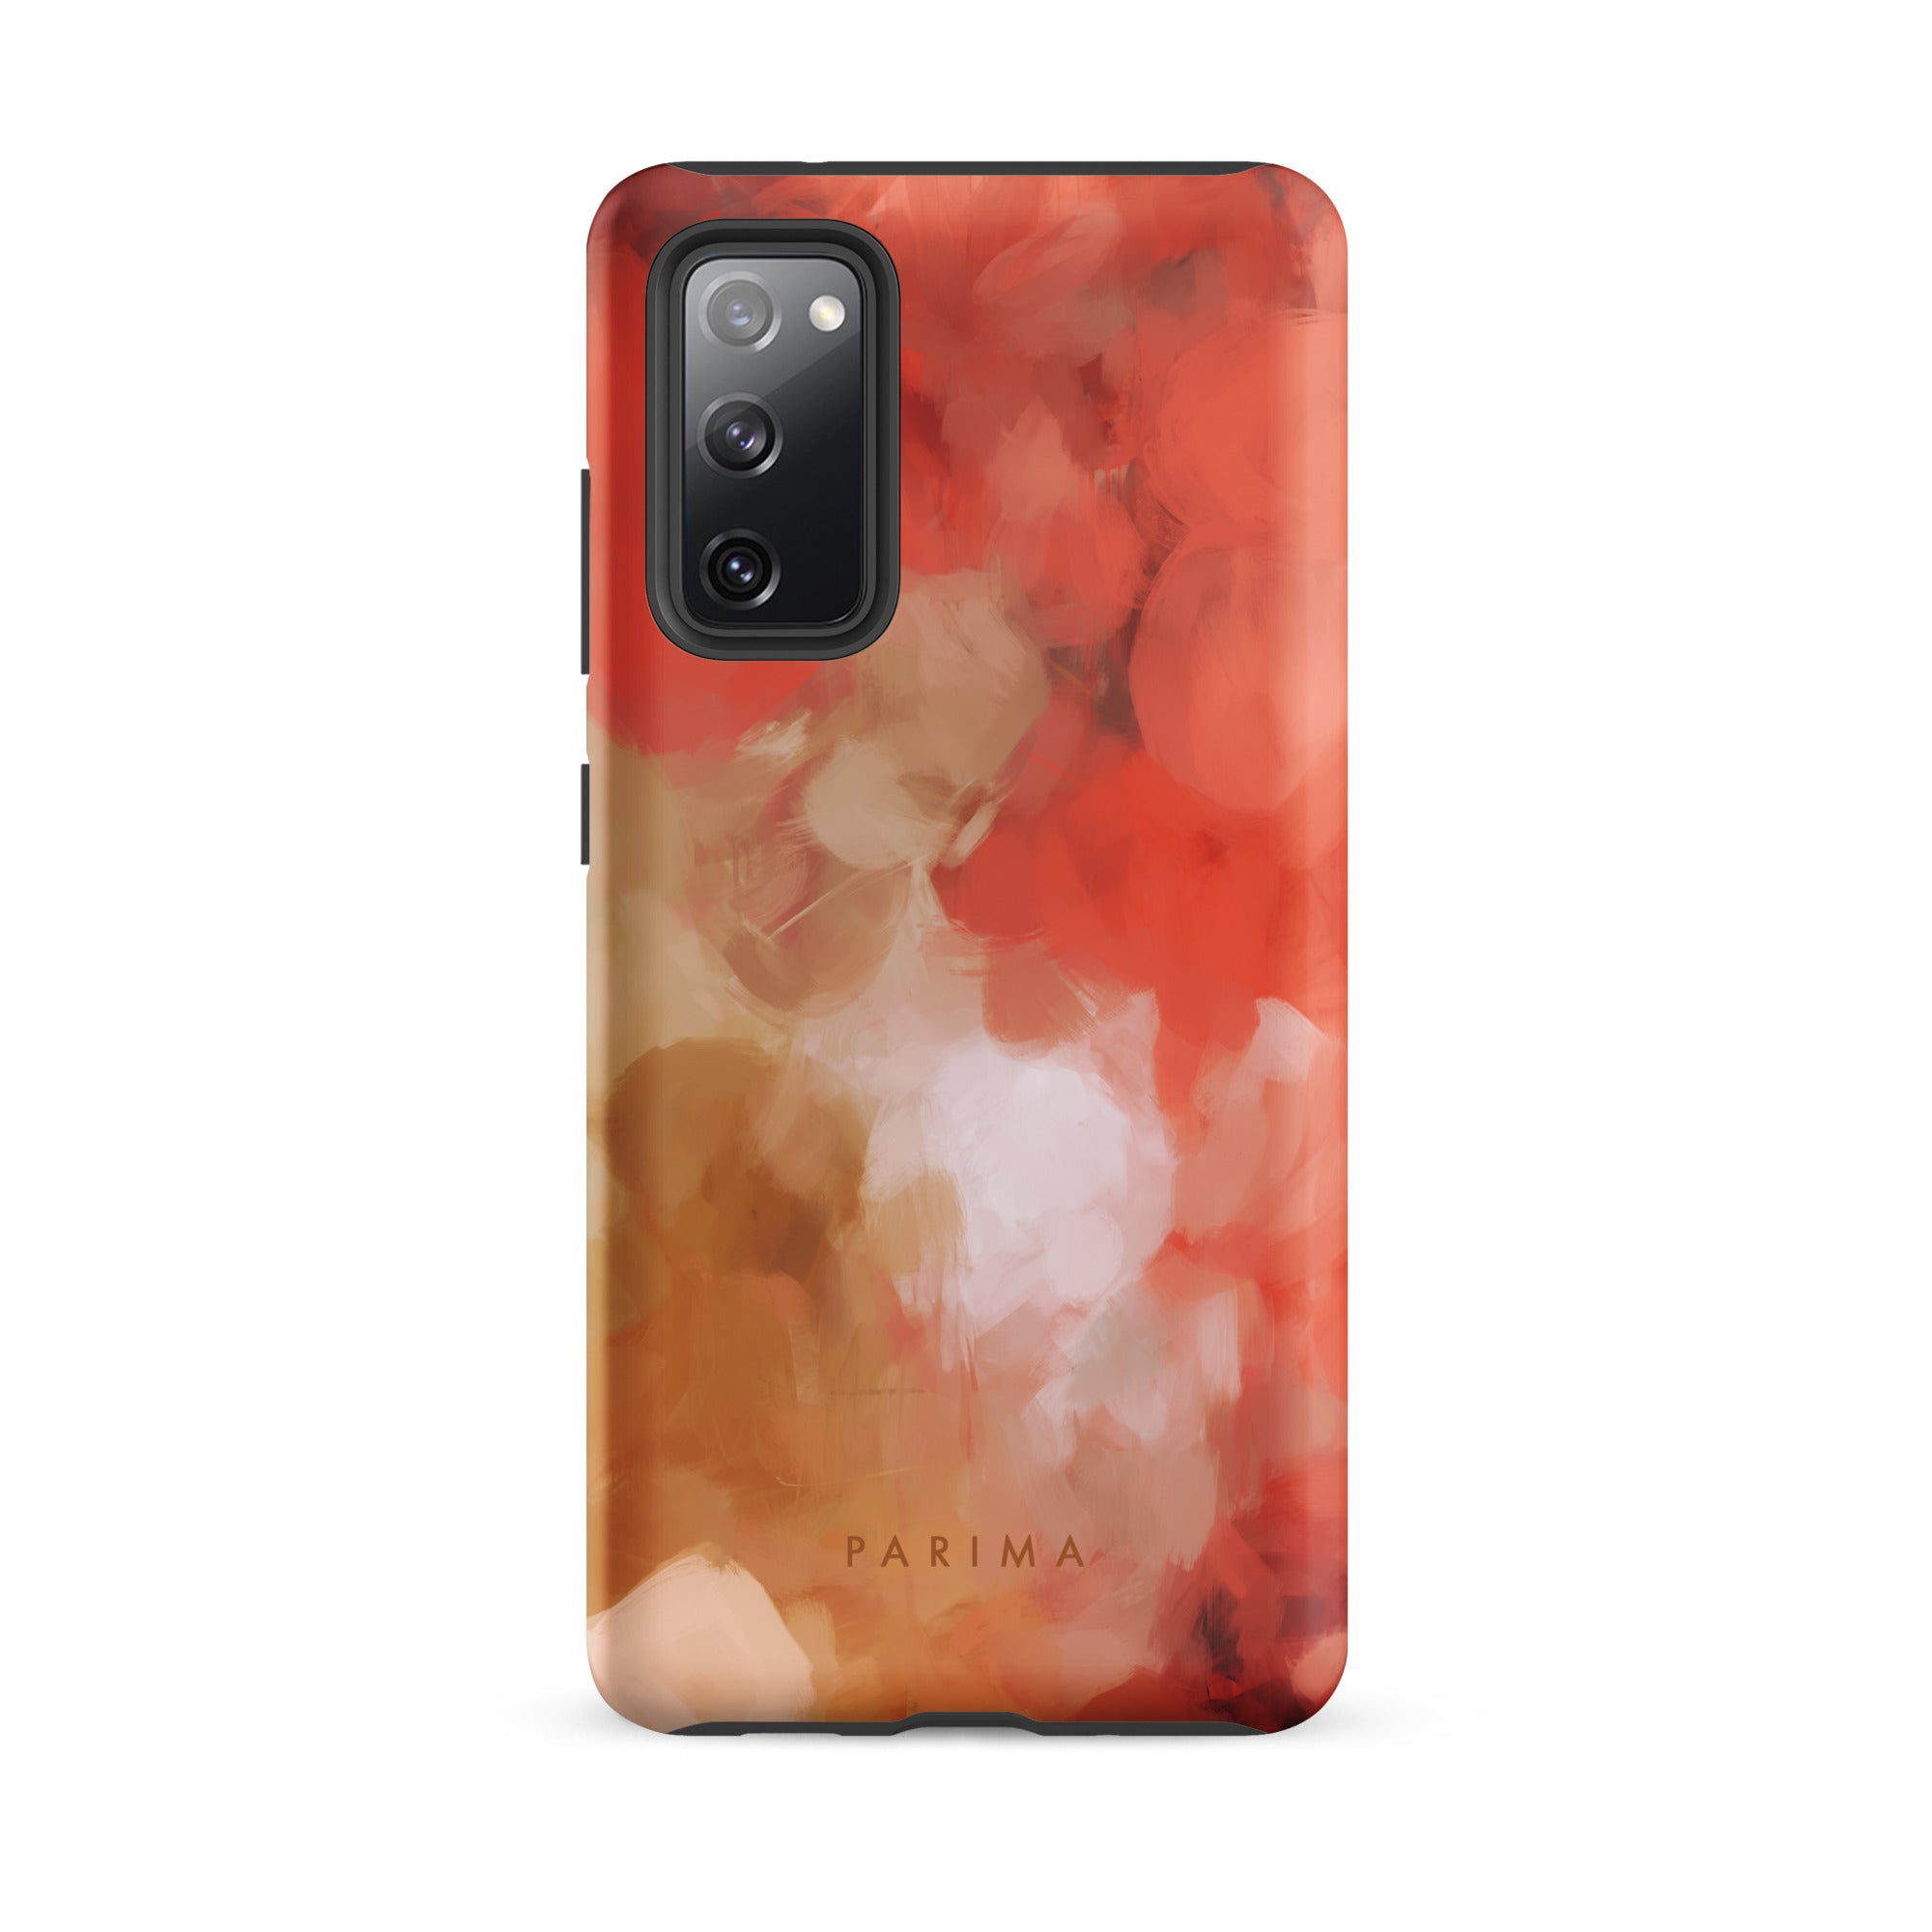 Begonia, pink and gold abstract art on Samsung Galaxy S20 FE tough case by Parima Studio